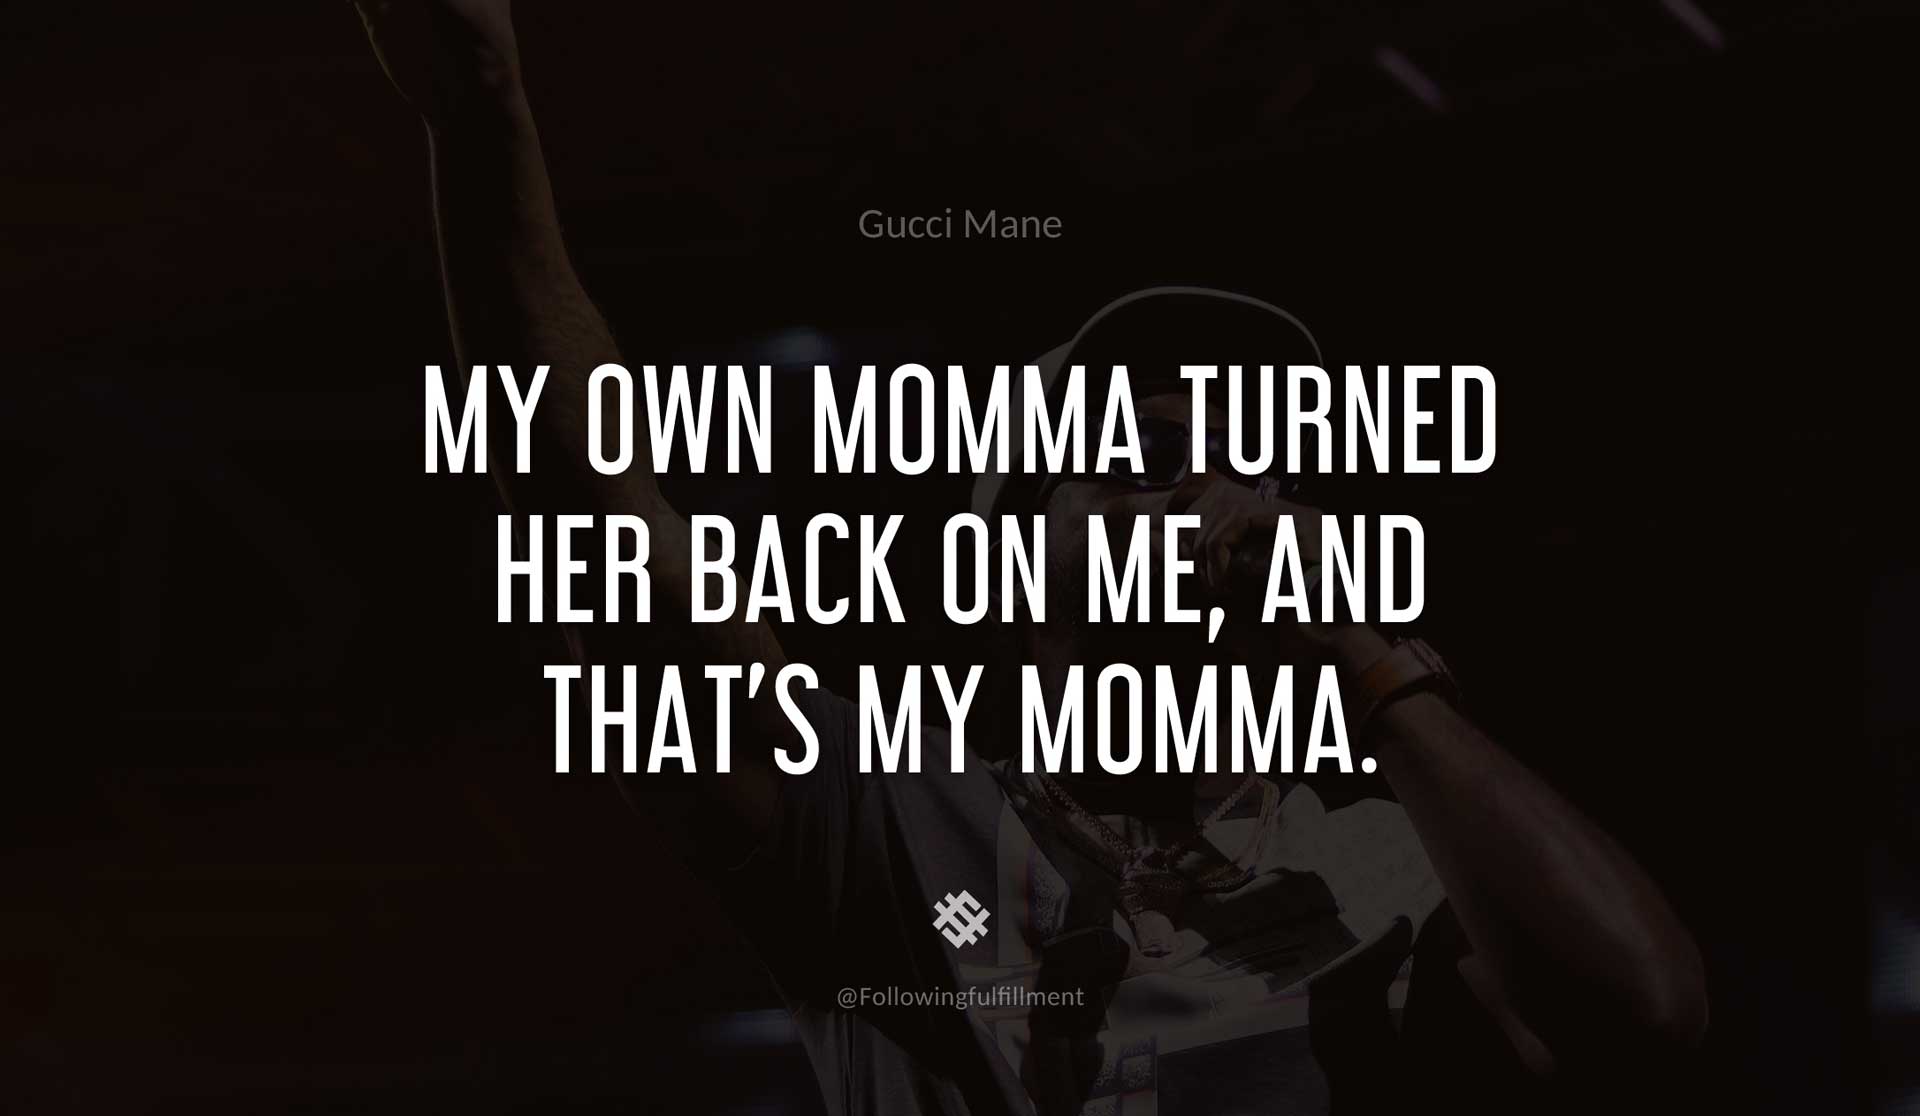 My-own-momma-turned-her-back-on-me,-and-that's-my-momma.-GUCCI-MANE-Quote.jpg